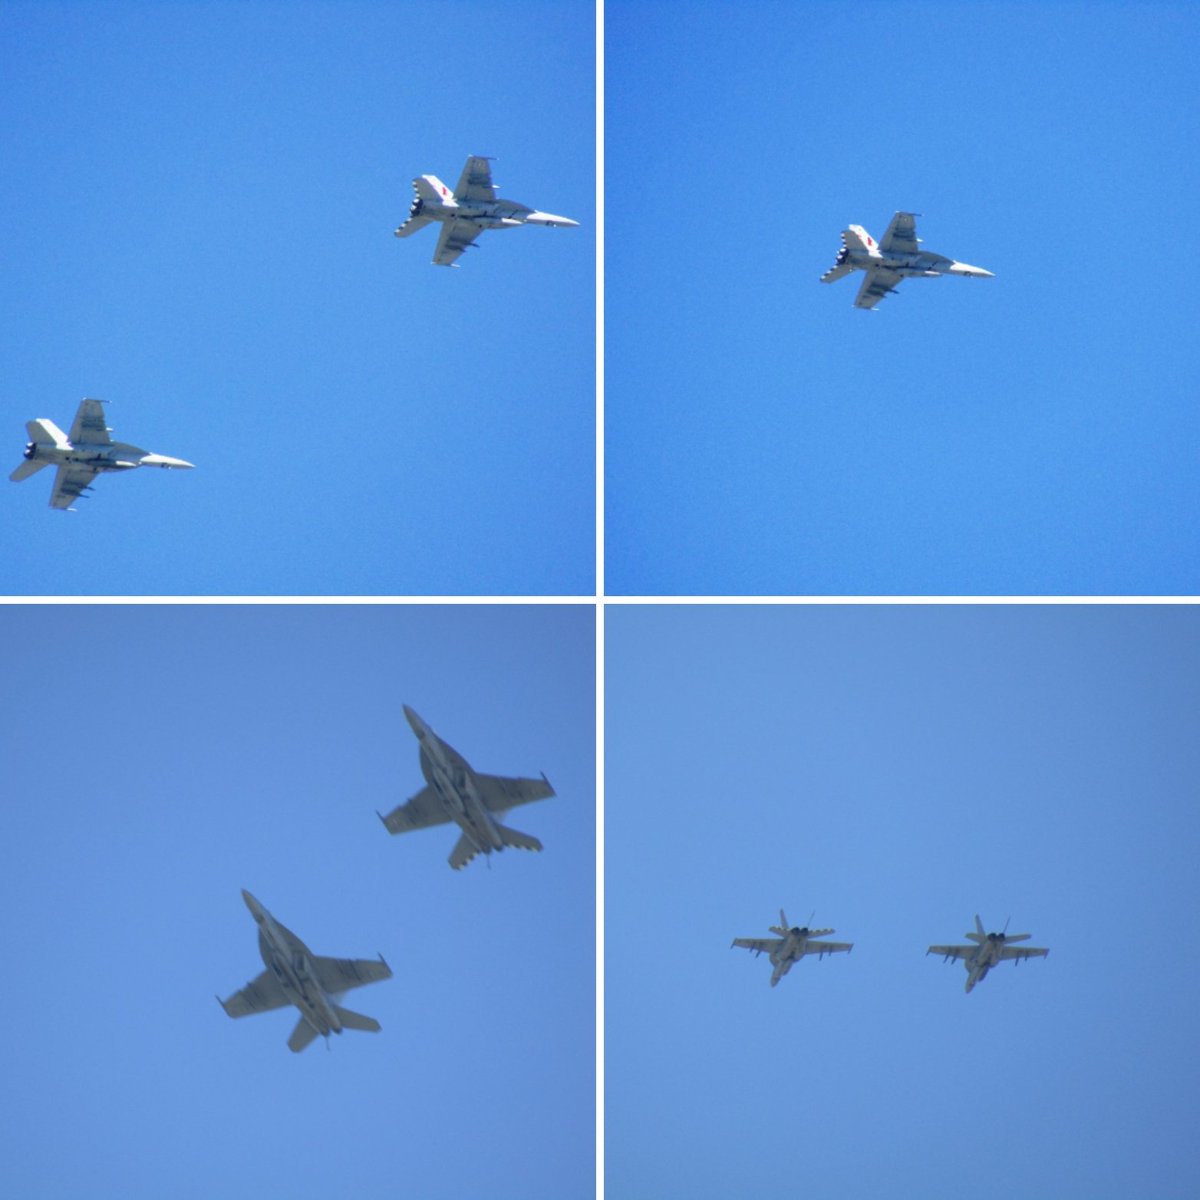 Got a nice #surprise while visiting #BrackettField in #laverne #california today: These #F18 #Hornet #fighters of  #vfa22, the #FightingRedcocks from #NAS #Leemore, circled the airport and then swooped over the #AutoClub400 @NASCAR #race in #Fontana. #AvGeek